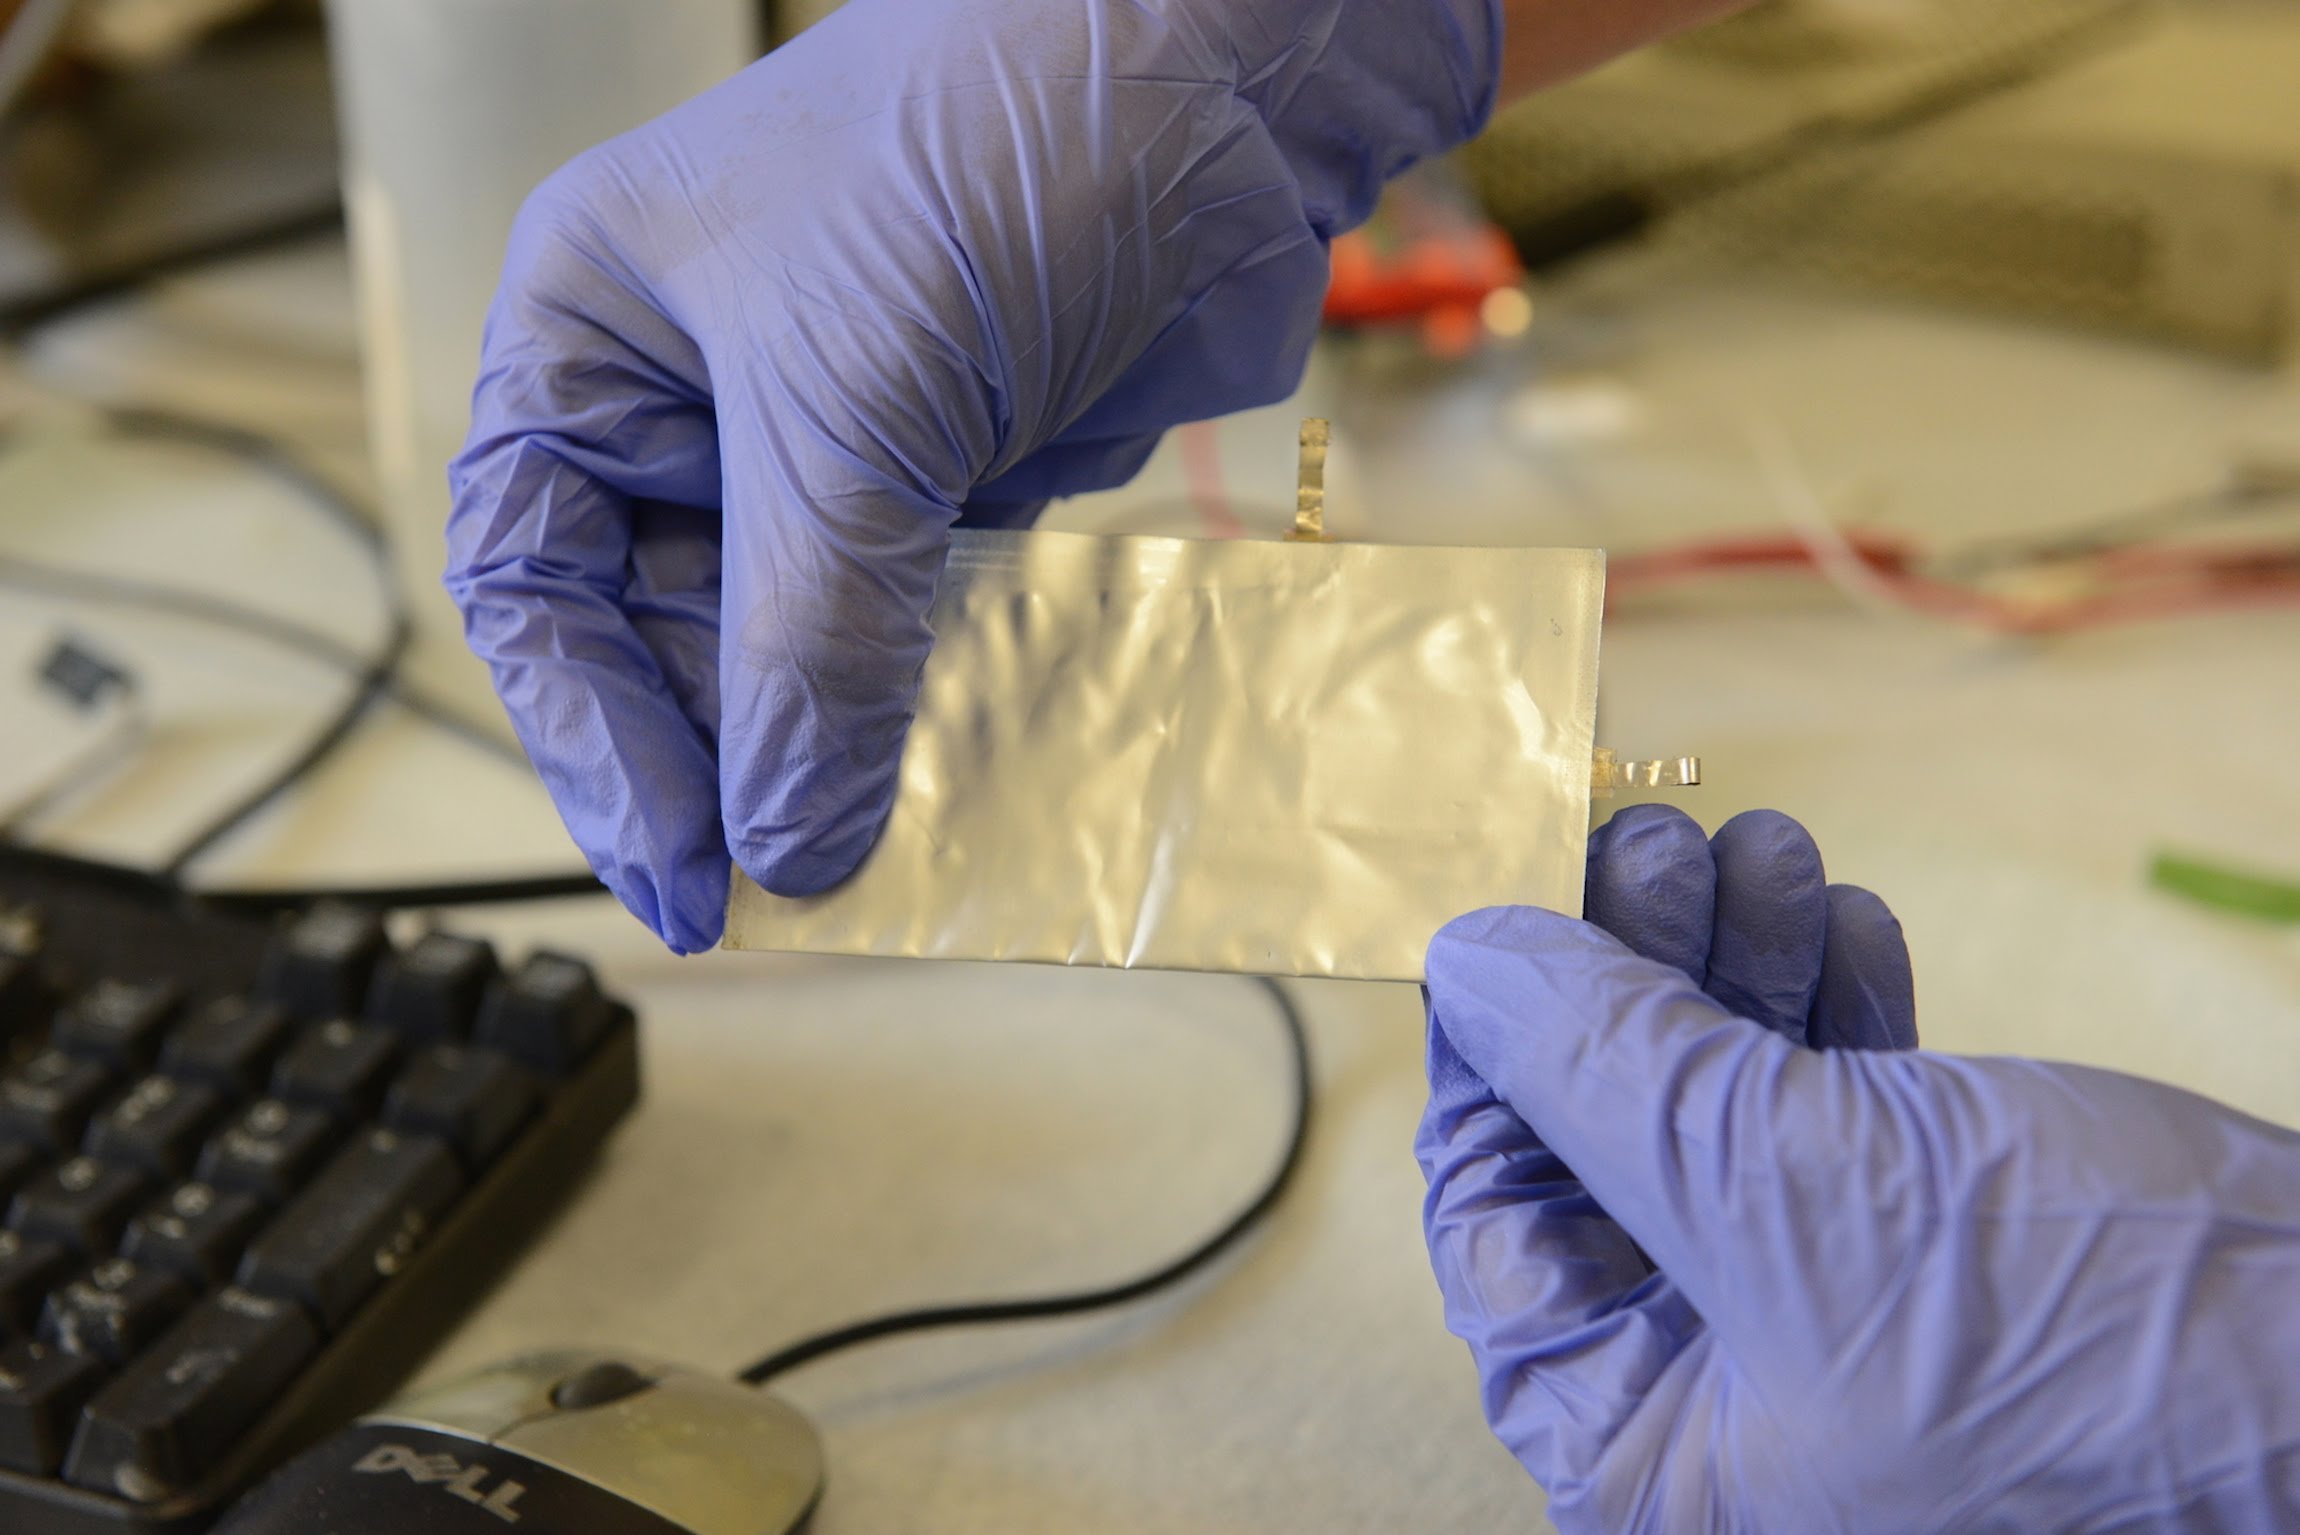 Skoltech has developed high-power potassium batteries that charge in 10 seconds